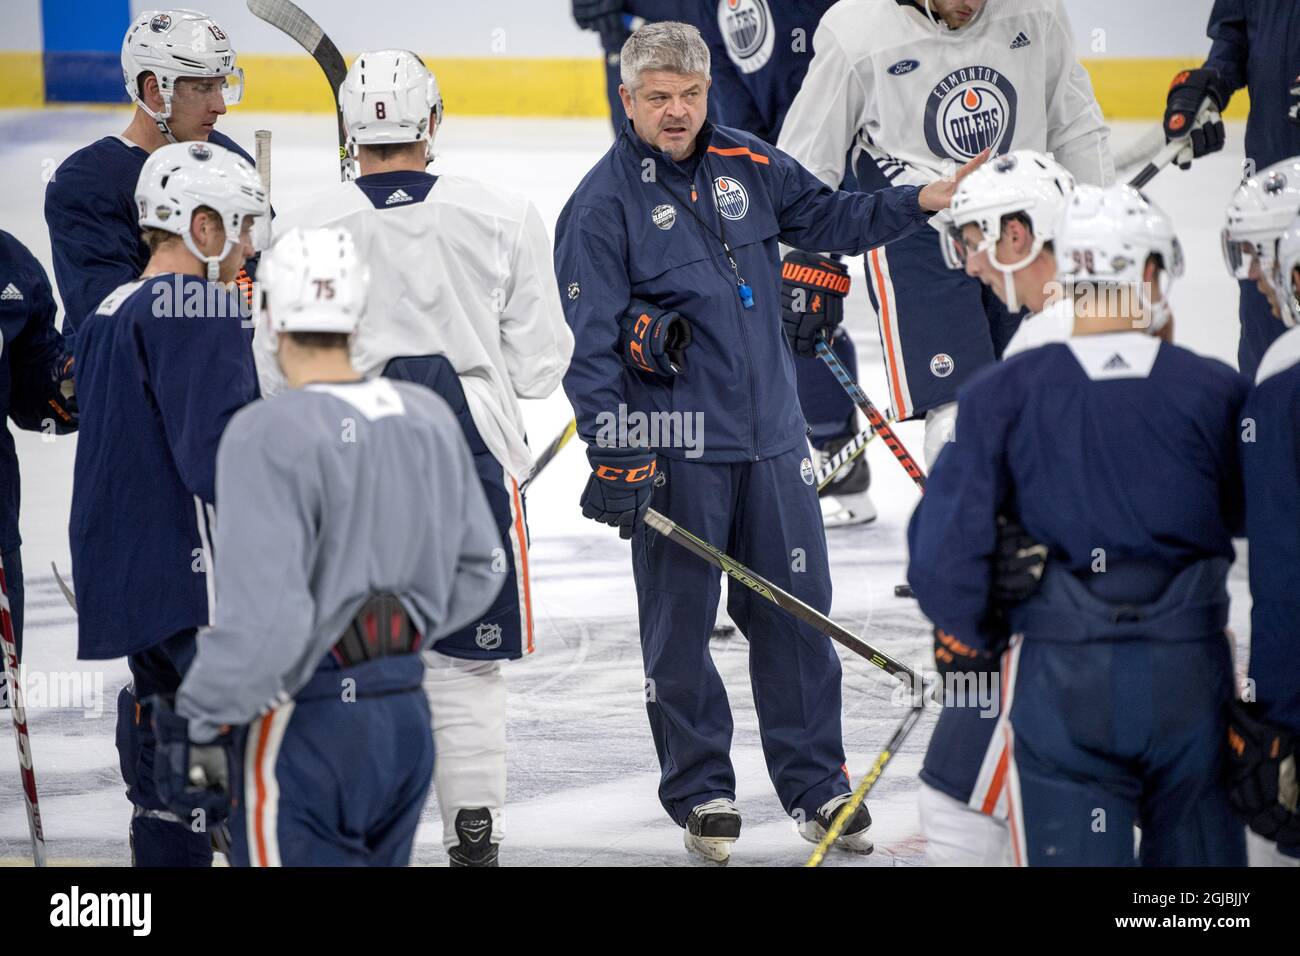 Edmonton Oilers' head coach Todd McLellan (C) talks to players during the team's training session in Gothenburg, Sweden, on Oct. 05, 2018, ahead of Saturday's NHL Global Tour match against New Jersey Devils. Photo: Bjorn Larsson Rosvall / TT / code 9200 *** EDITORIAL USE ONLY ***  Stock Photo